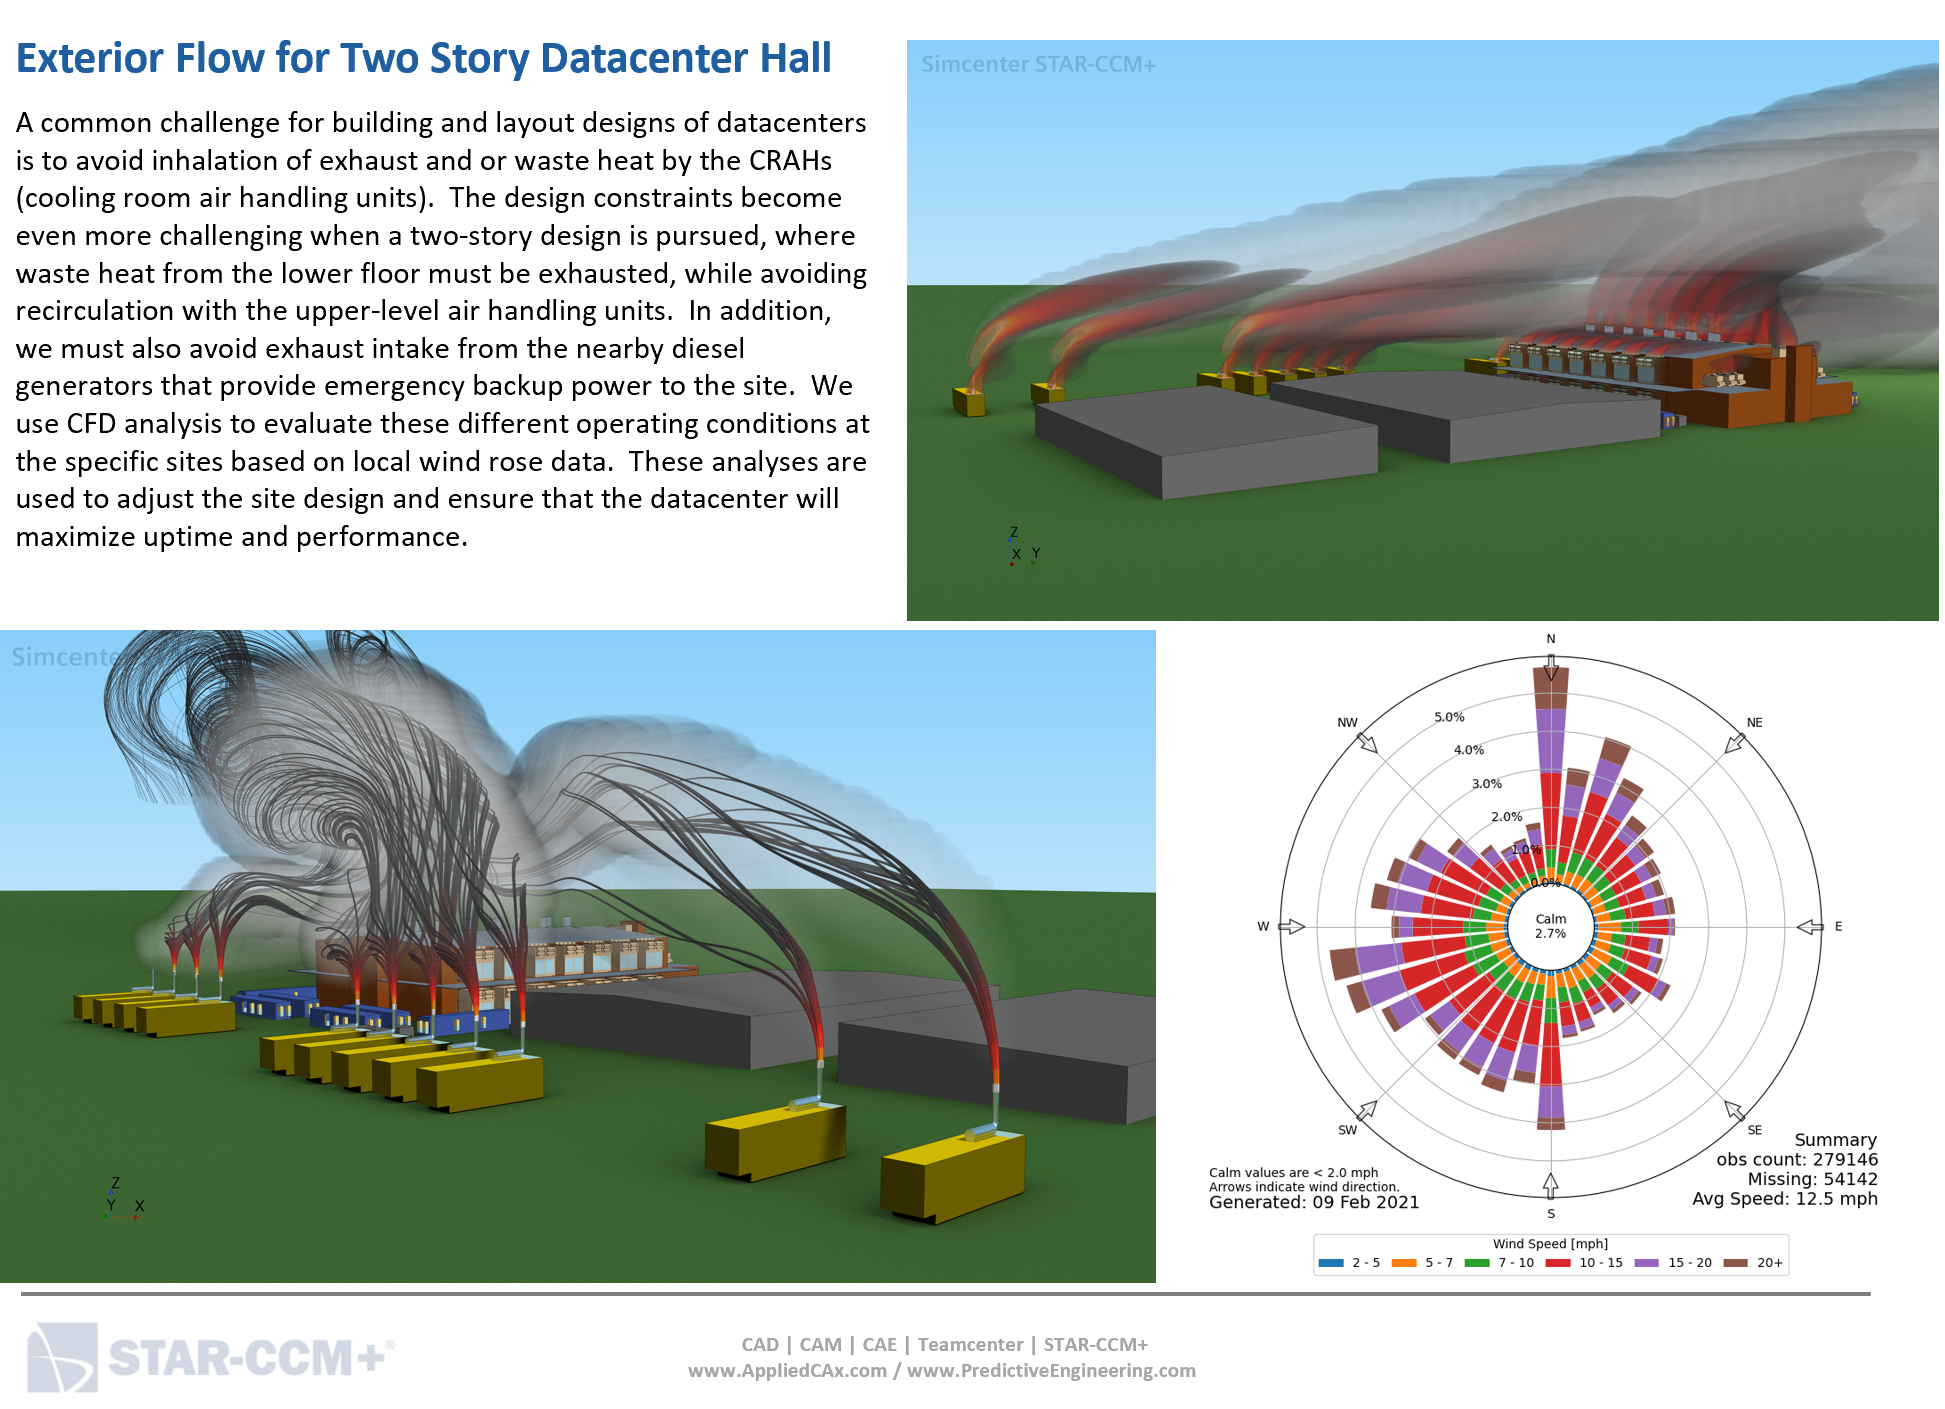 Exterior Flow for Two-Story Datacenter Hall - Predictive Engineering CFD Services and Consultants